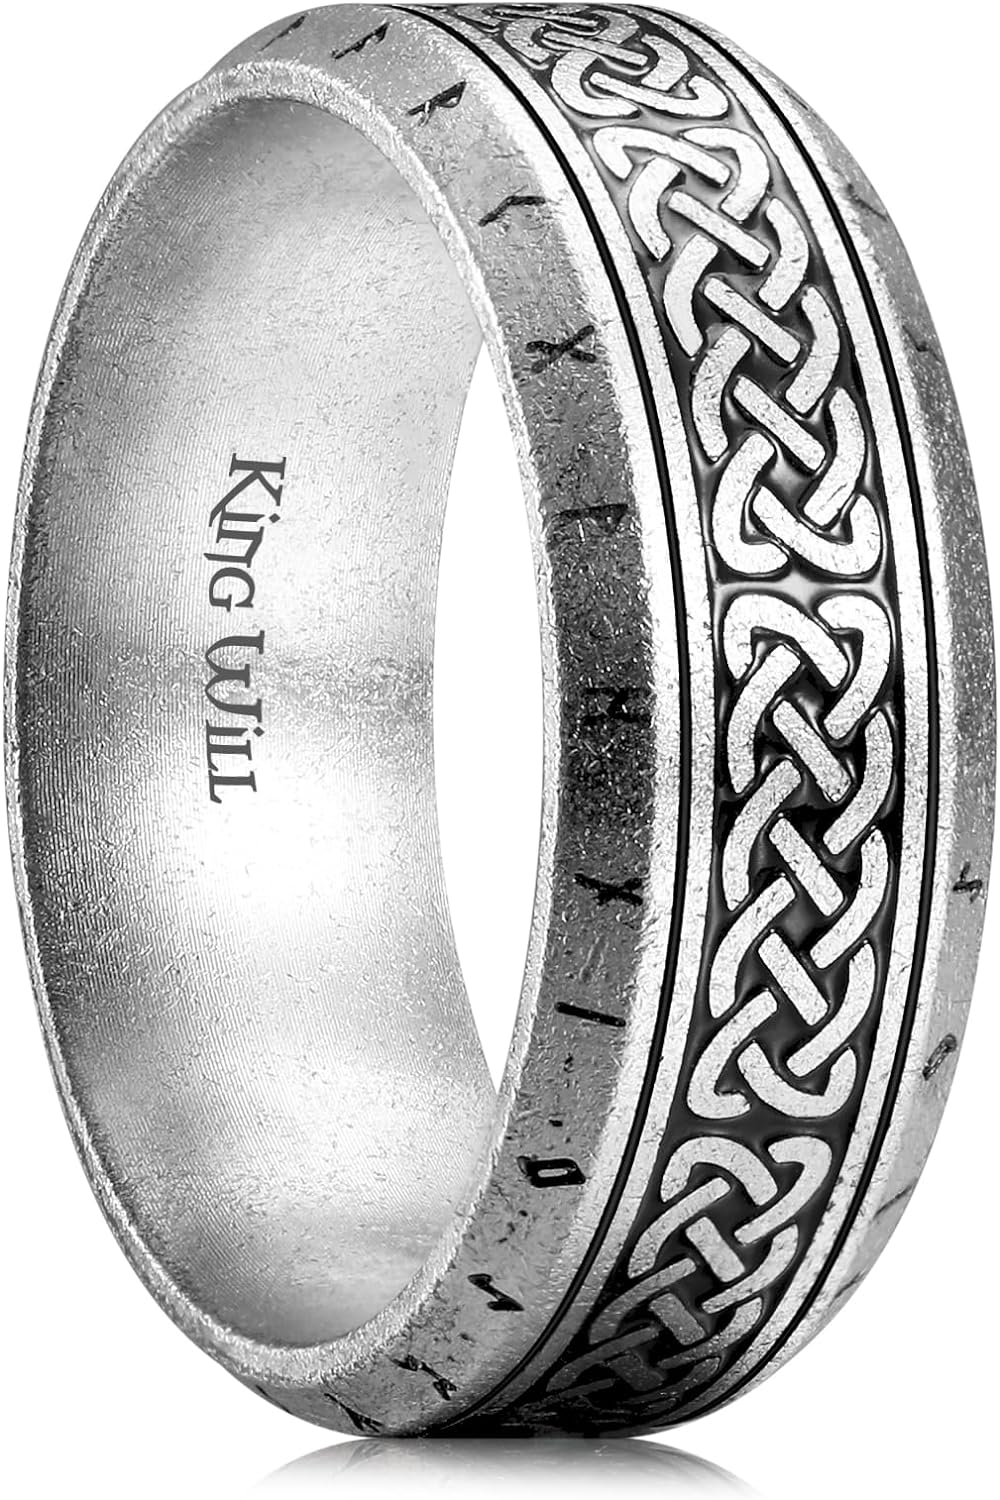 King Will Stainless Steel Wedding Band for Men - 8mm Black Silver Plated High Polished Inlay Celtic knot Ring for Everyday Wear Comfort Fit